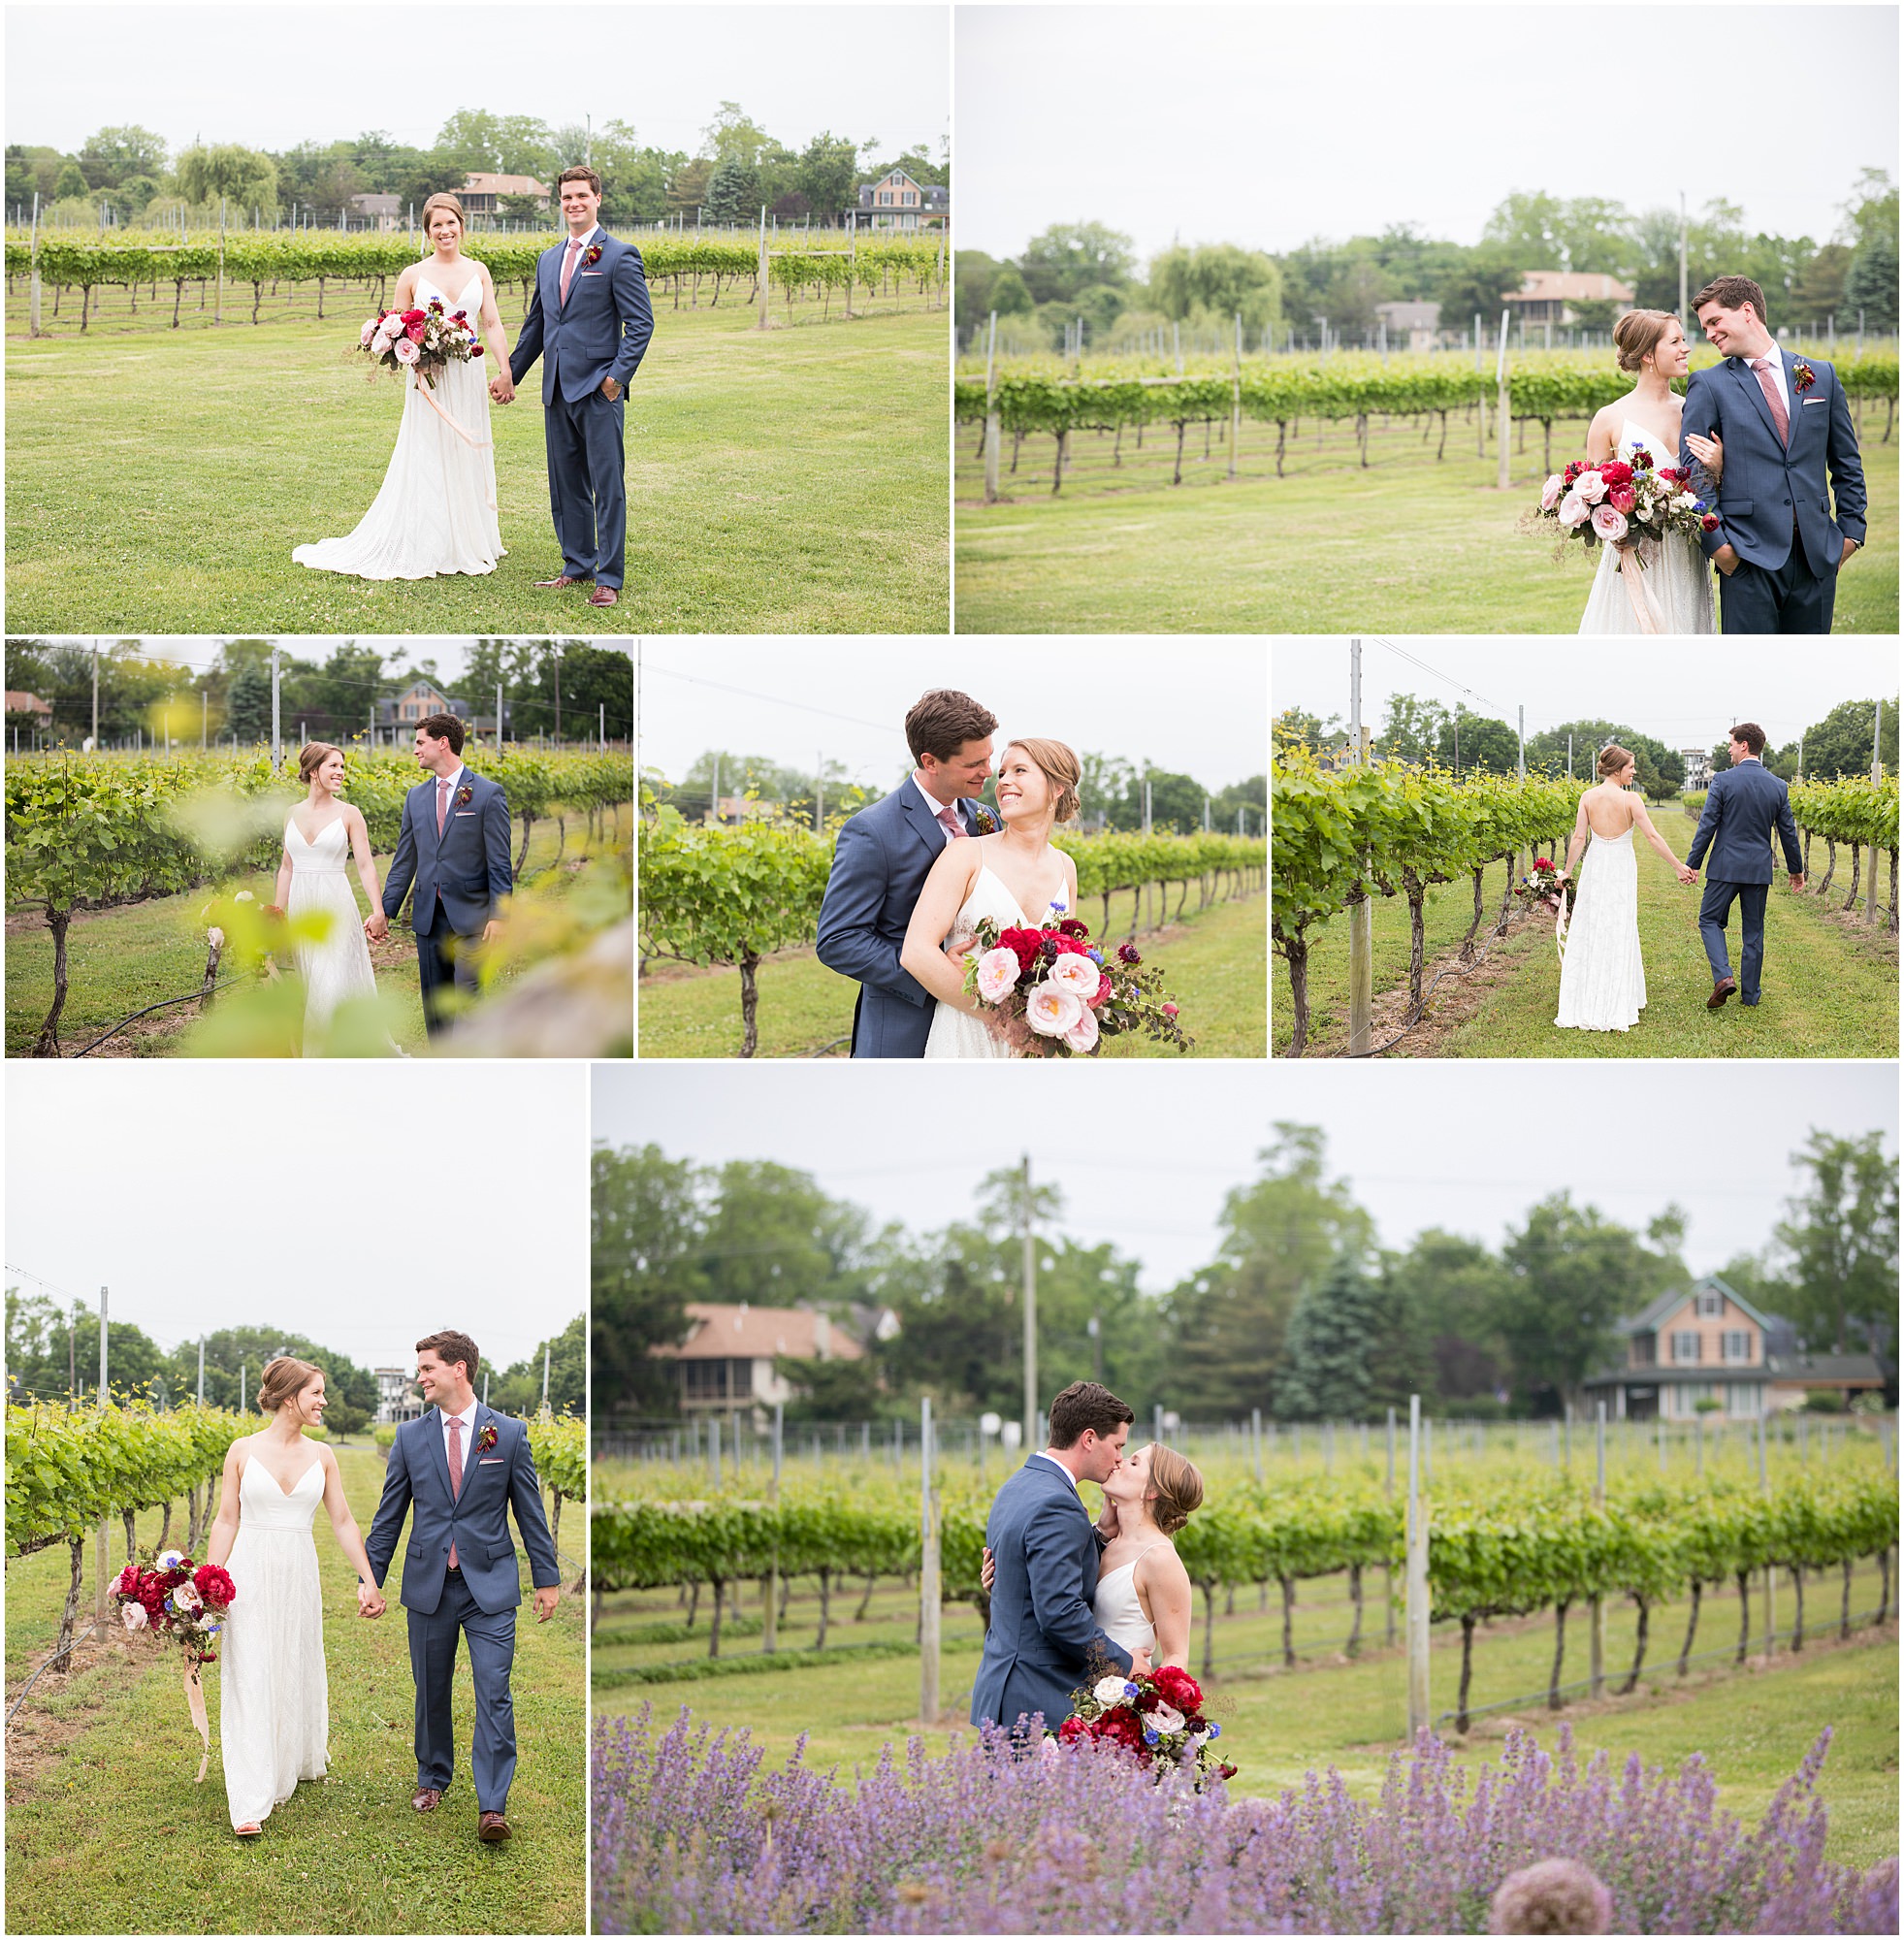 Best Wedding Venues in Cape May: Willow Creek Winery